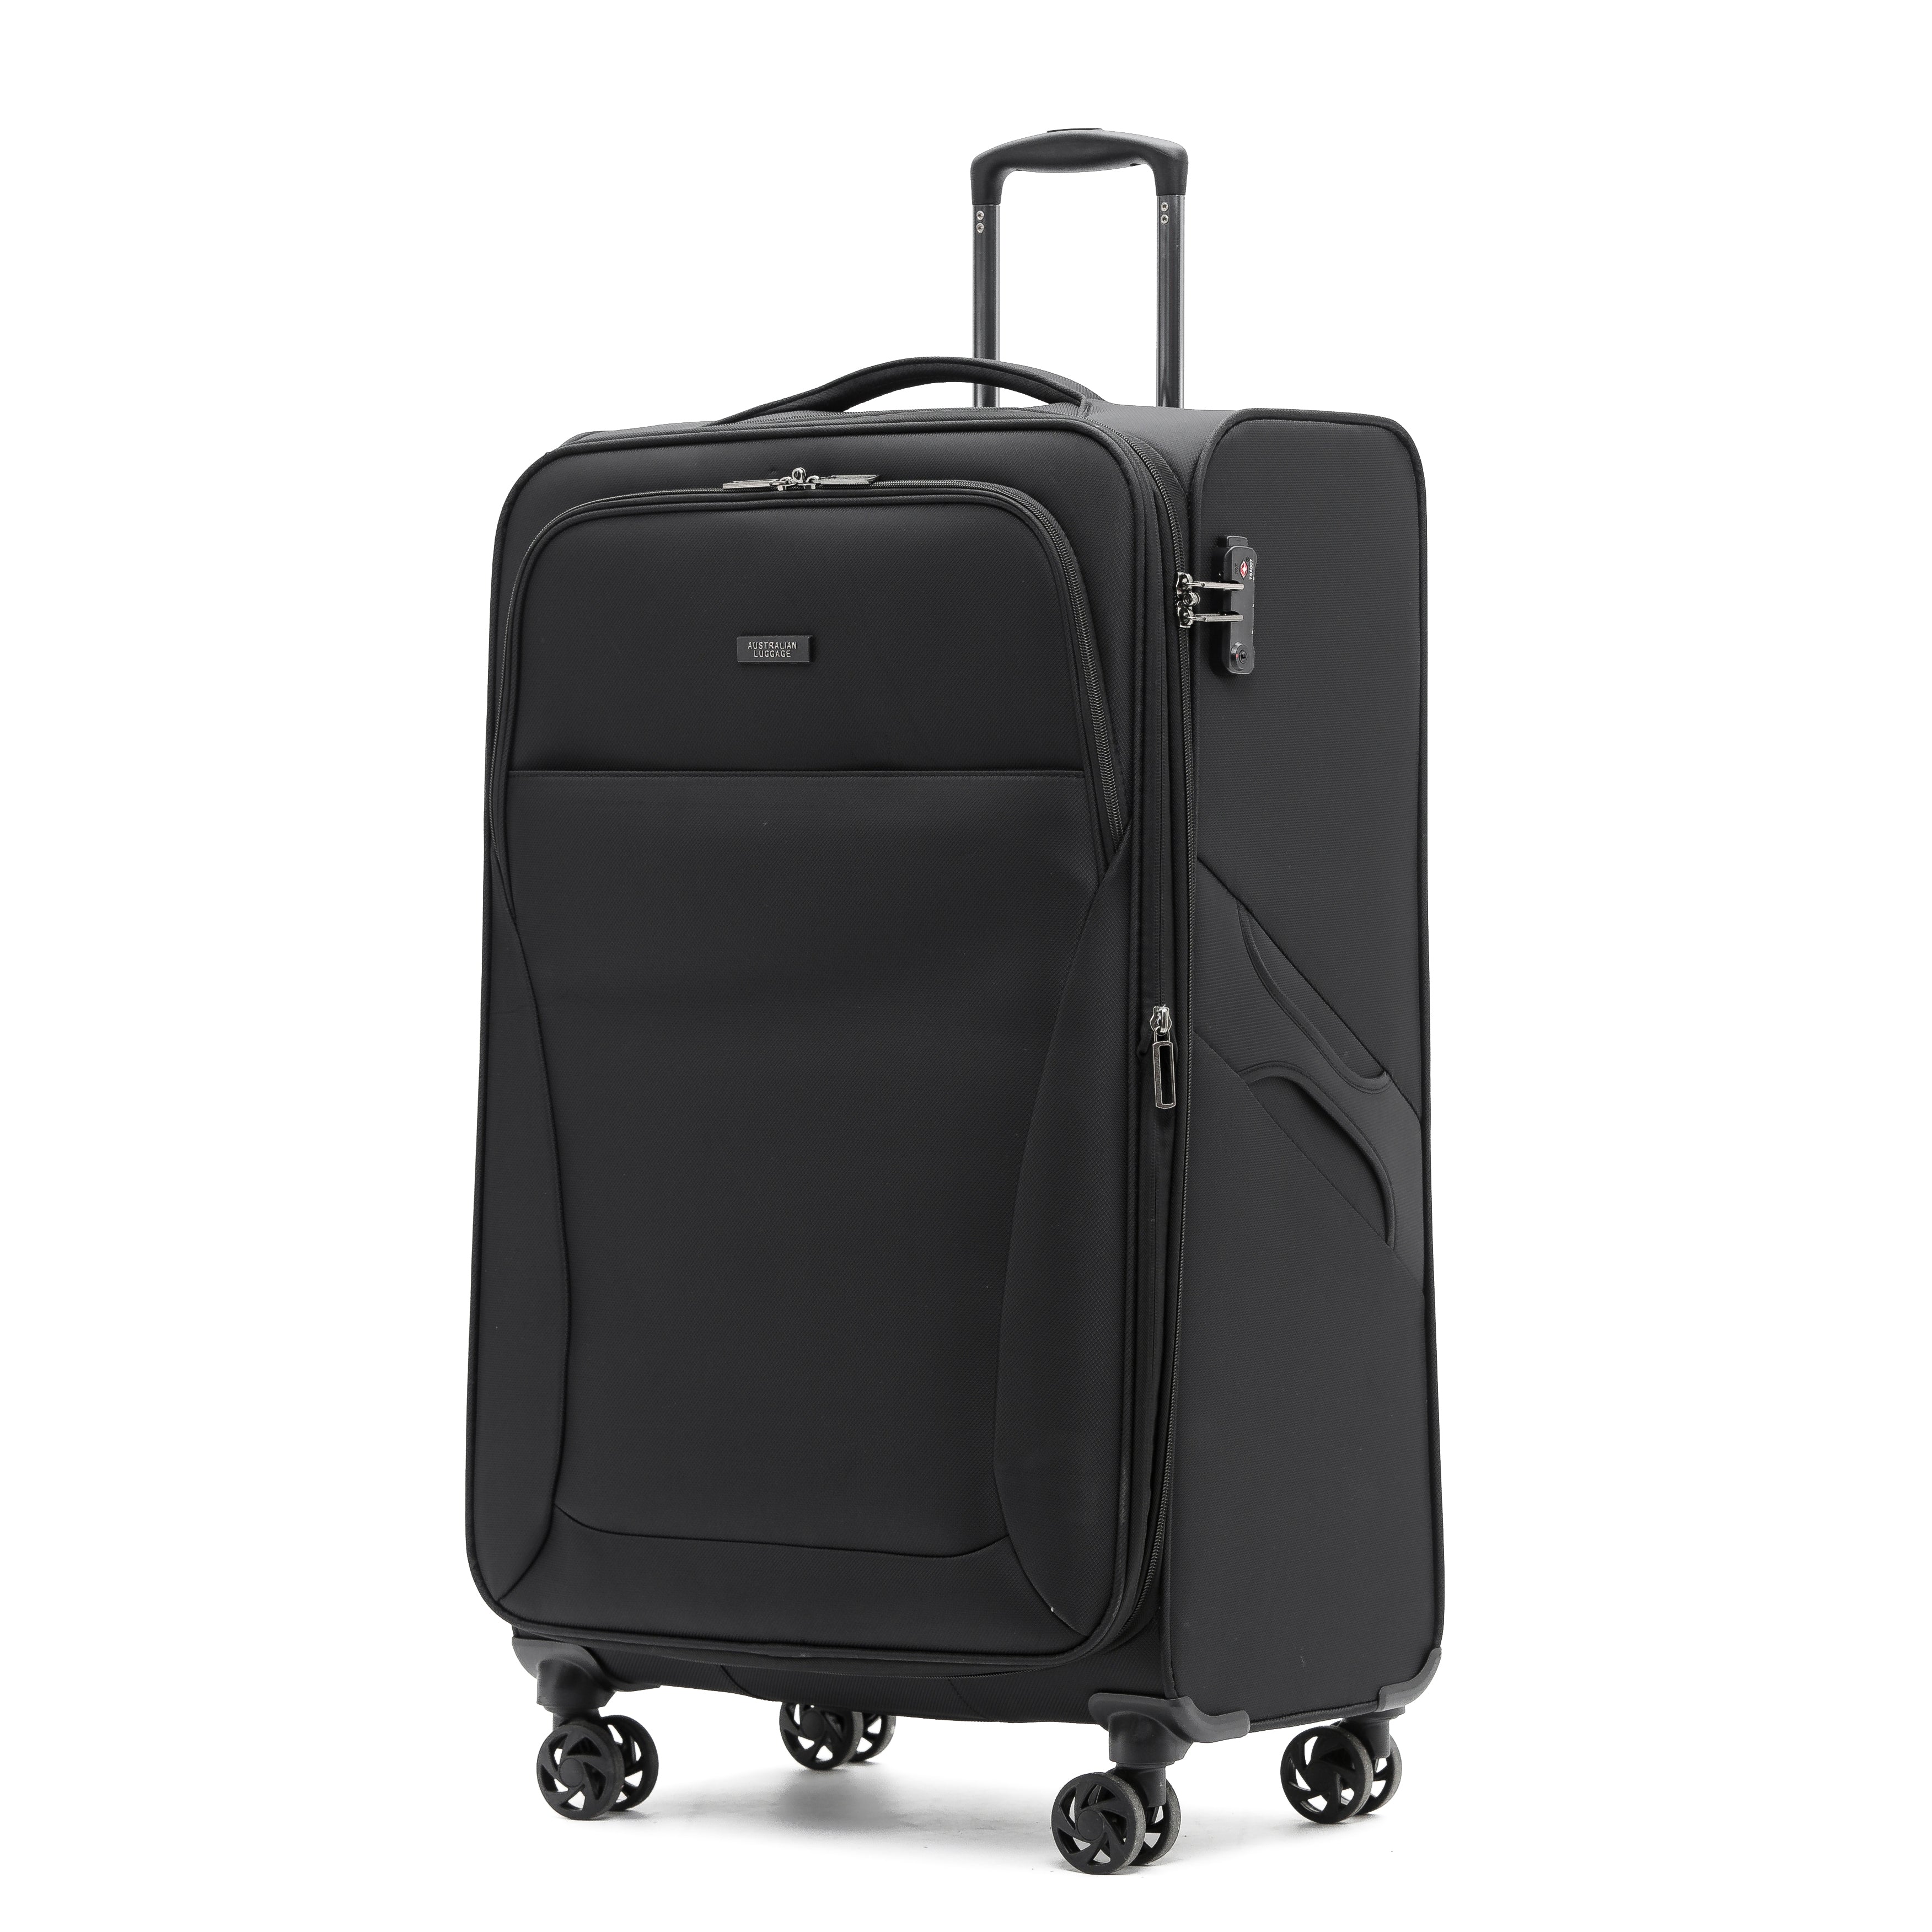 AUS LUGGAGE - WINGS Trolley Case 29in Large - BLACK-2